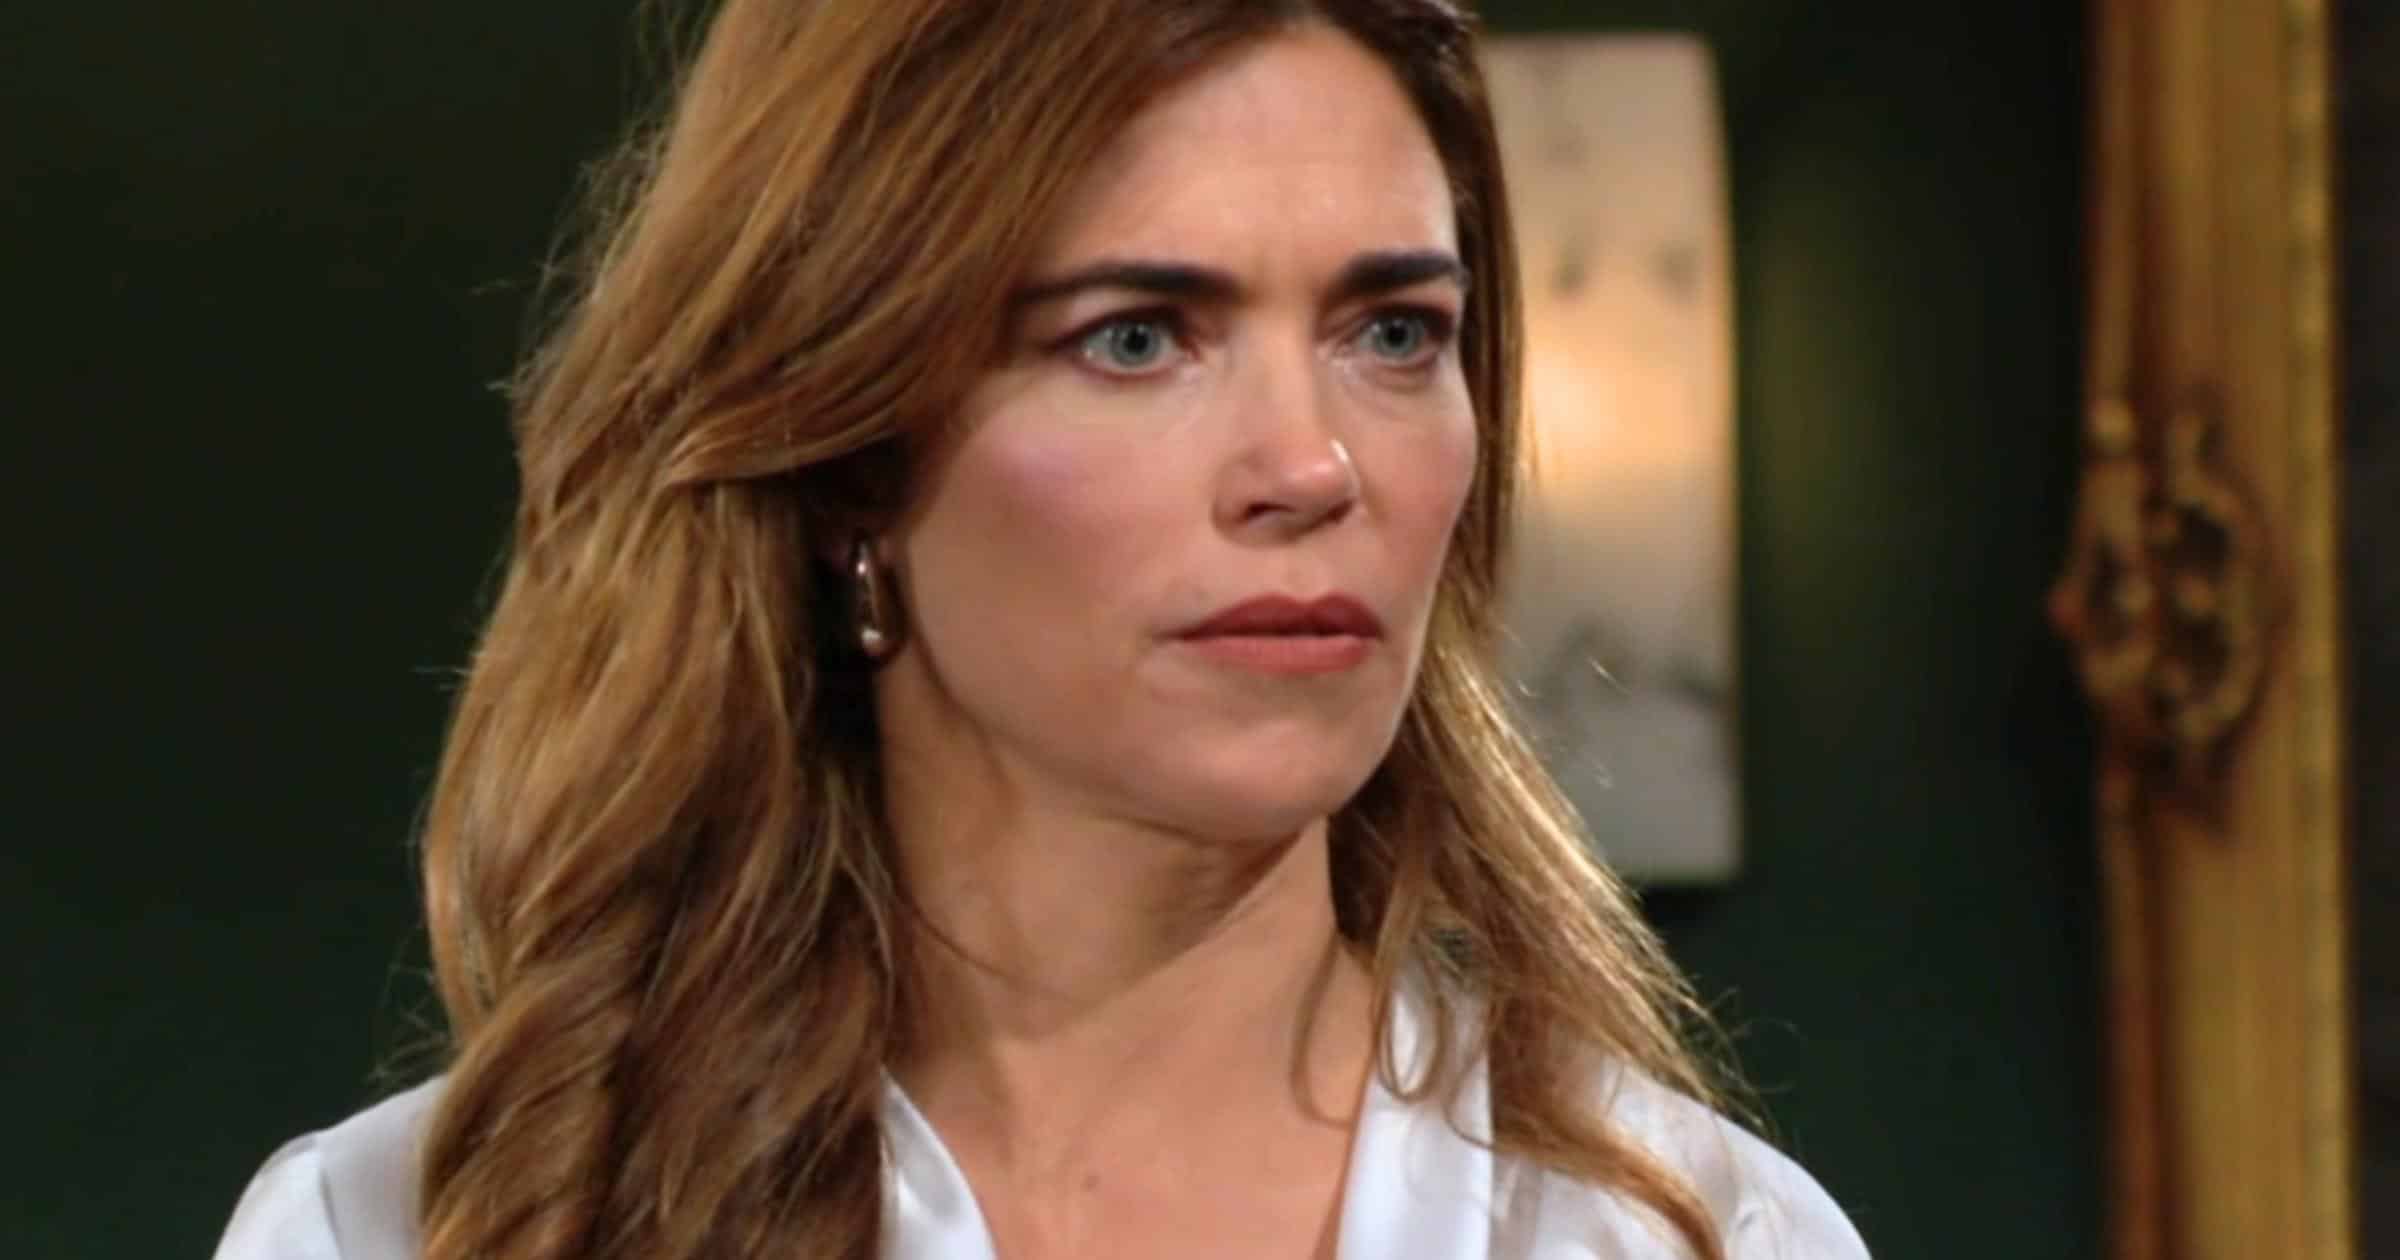 The Young and the Restless - Nov 1 - Victoria